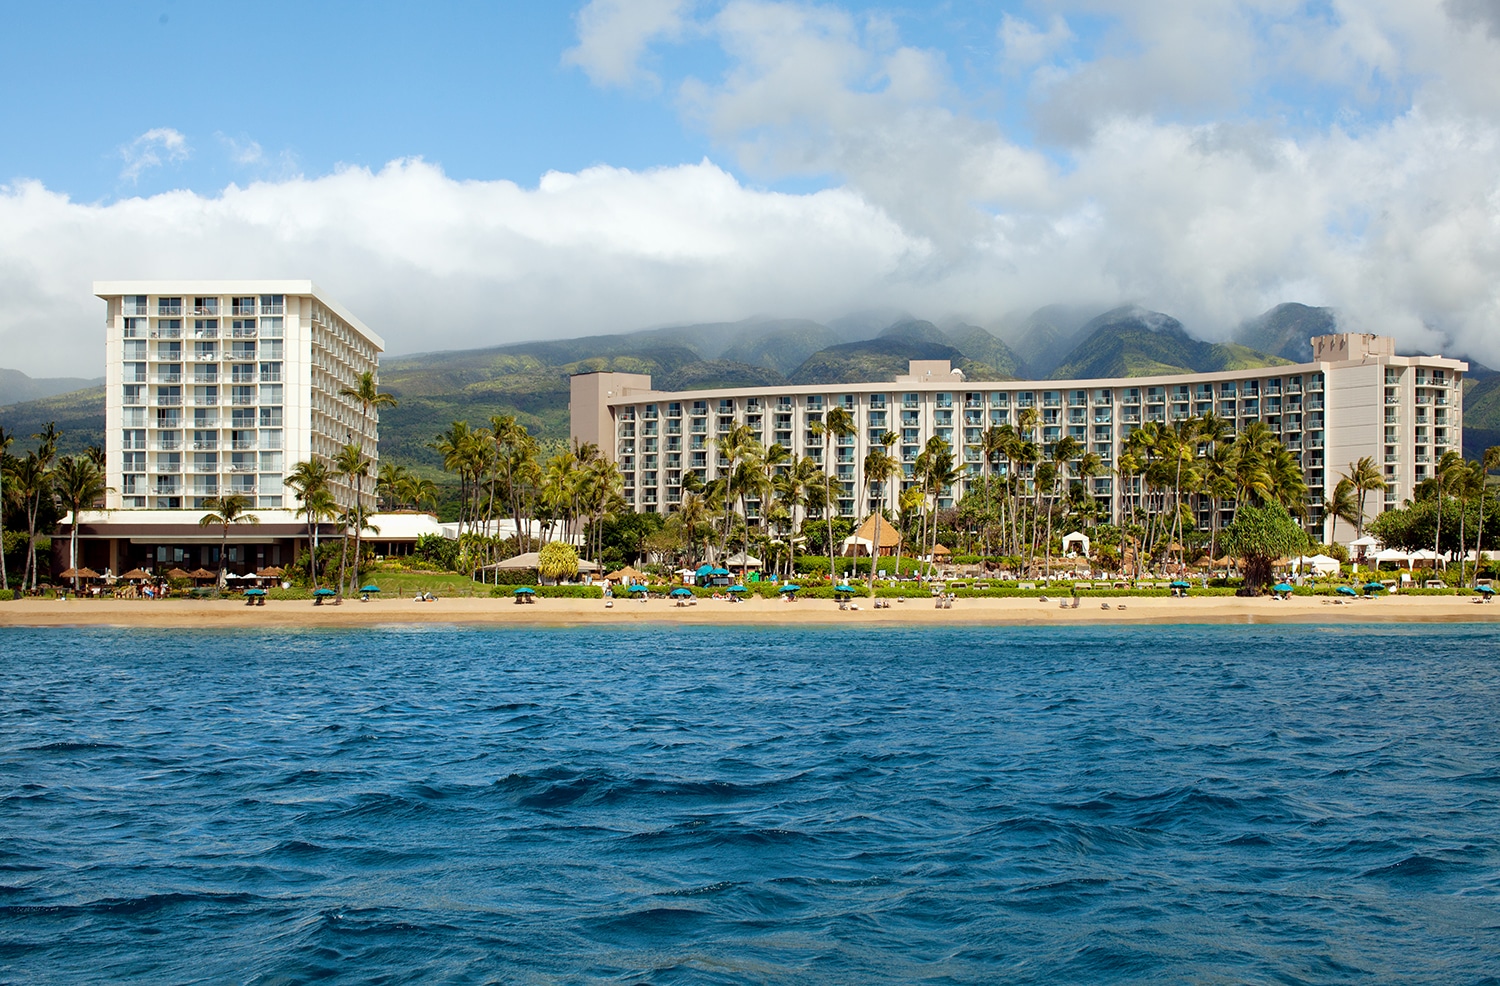 Cheap and Affordable Hotels in Maui: The Westin Maui Resort & Spa, Kaanapali